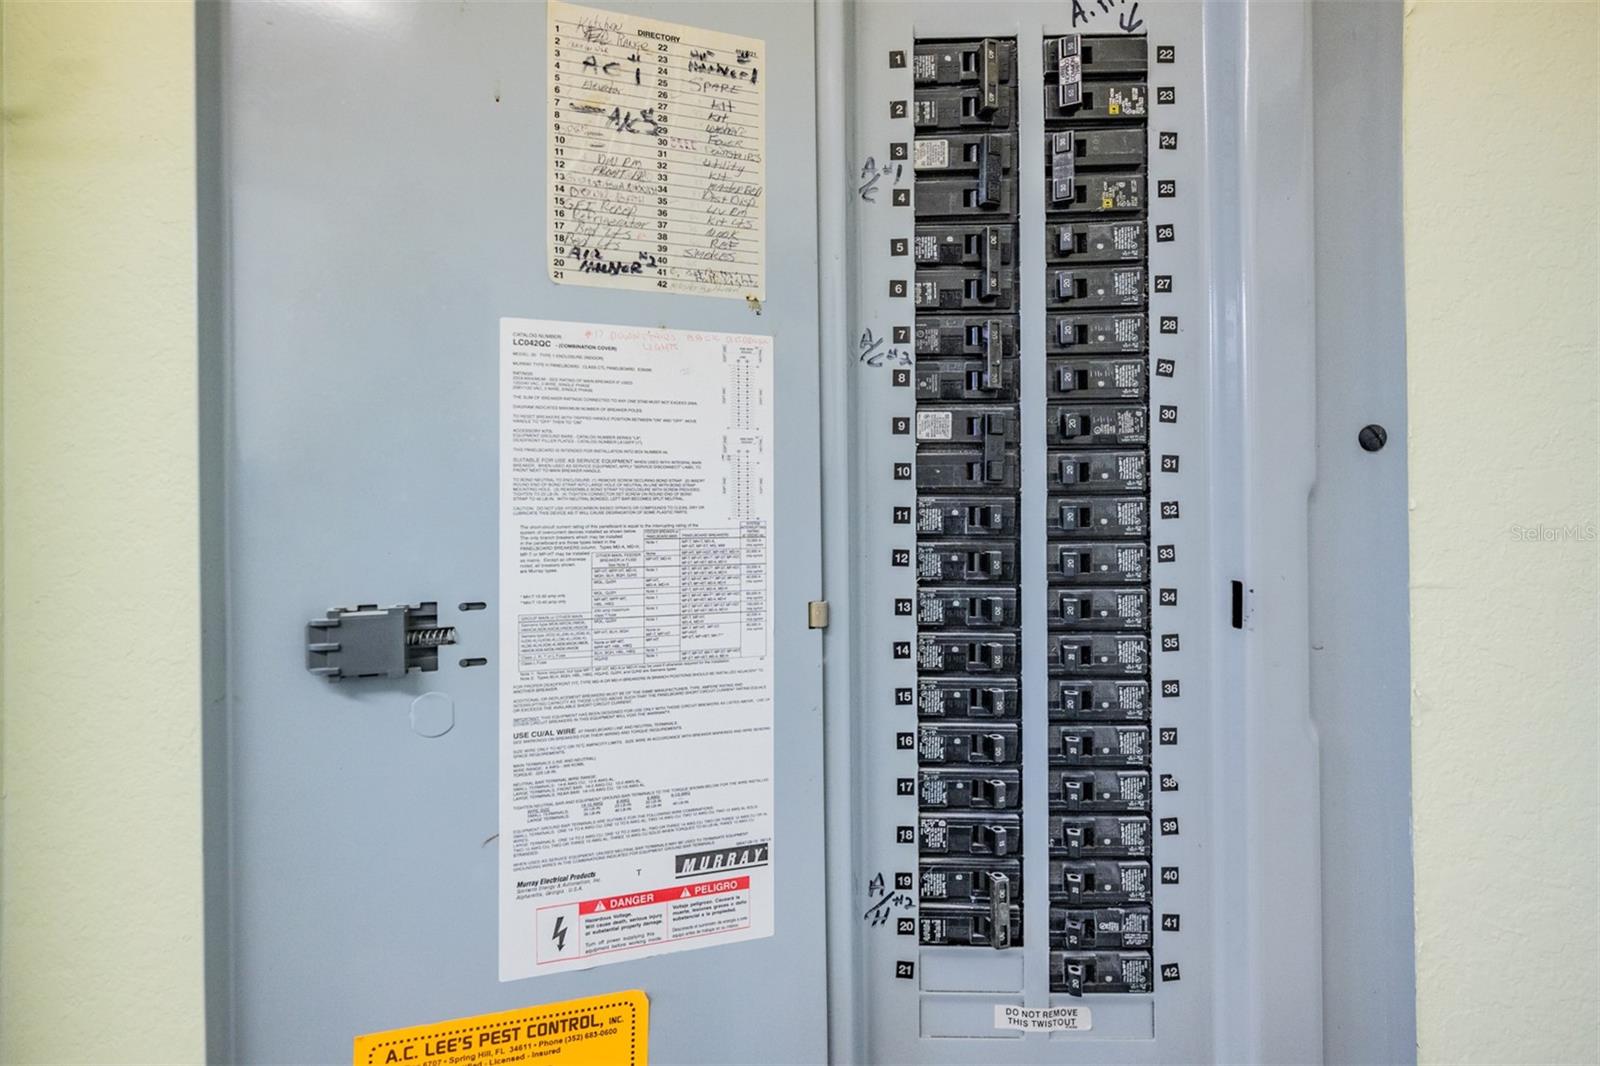 Electrical Panel located in the laundry room